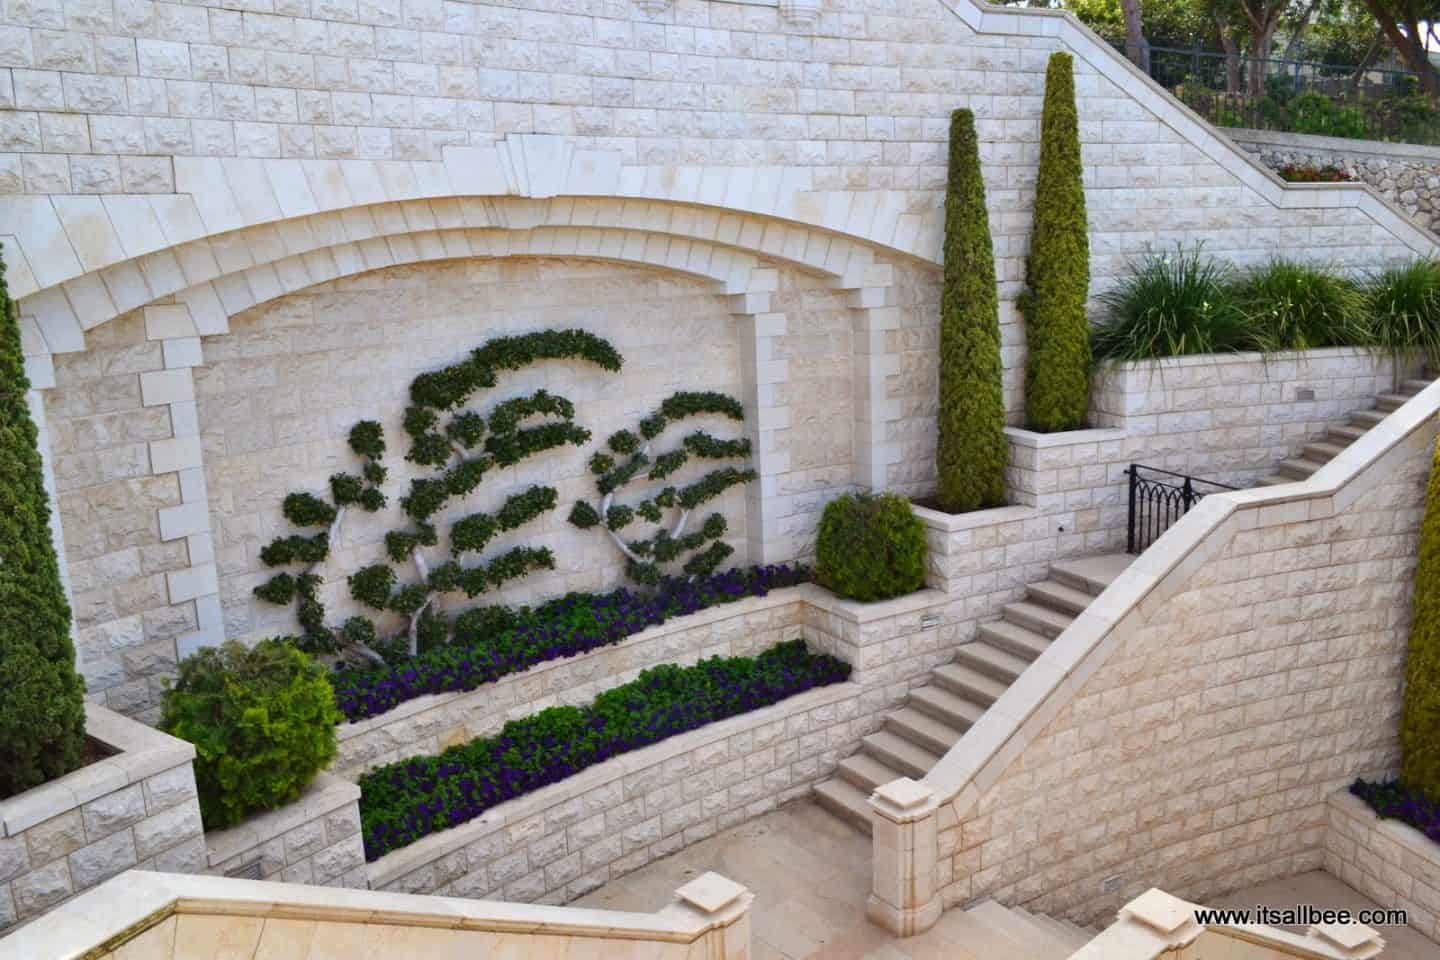 Exploring Bahai Gardens On Mount Carmel In Haifa Plus Why This Is A Must See In Israel